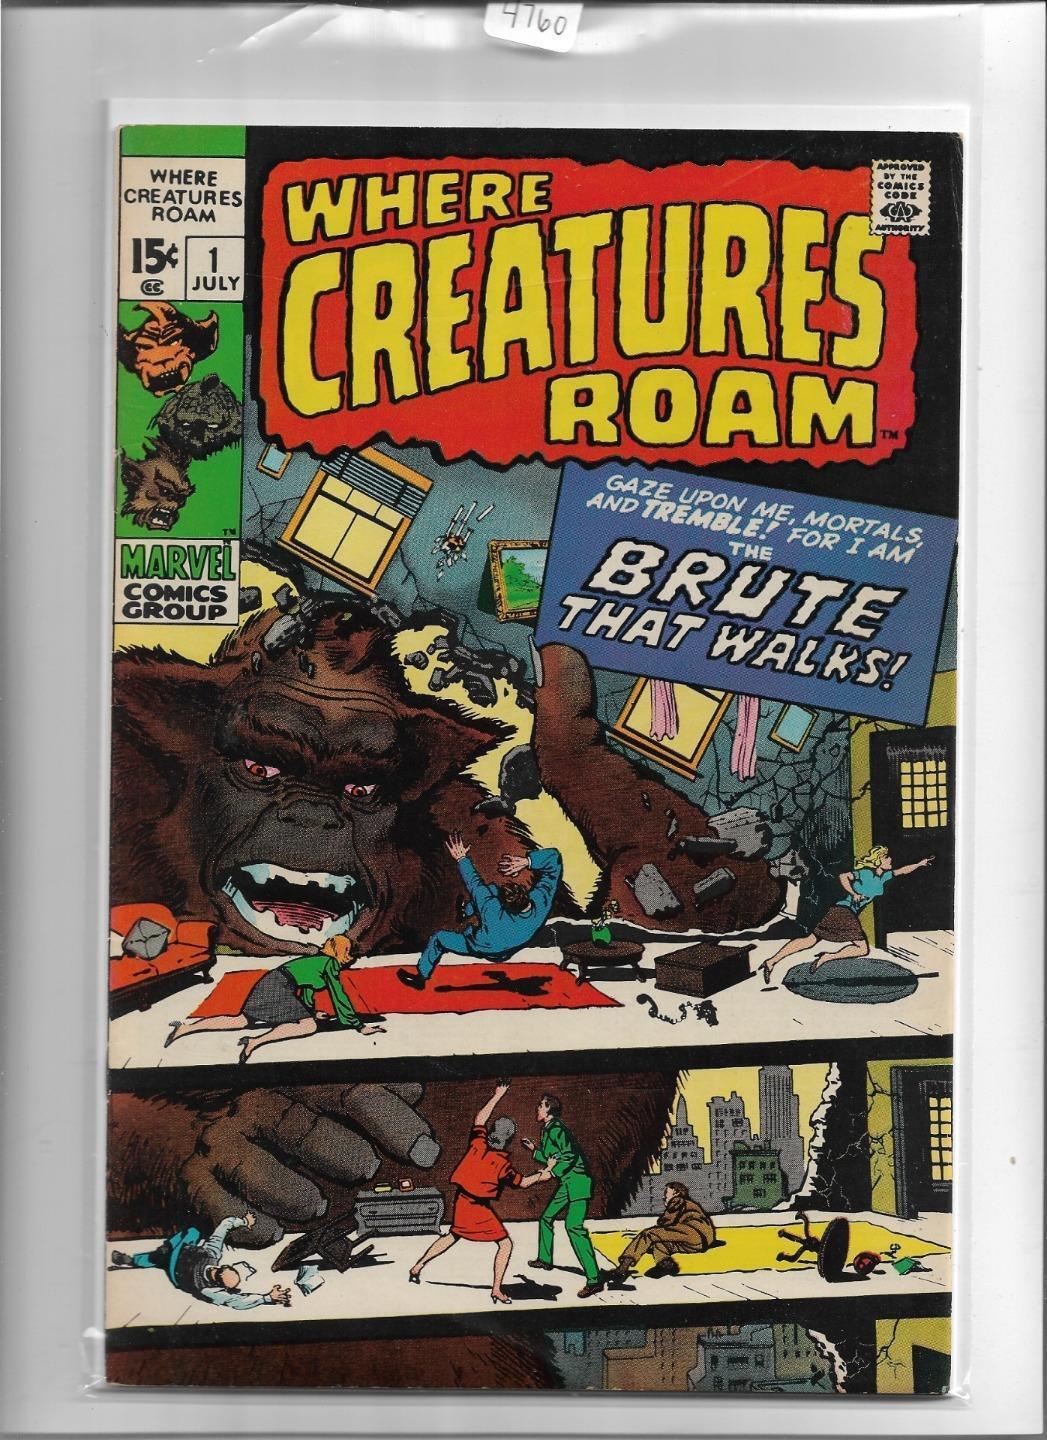 WHERE CREATURES ROAM #1 1970 VERY FINE+ 8.5 4760 cover tanning